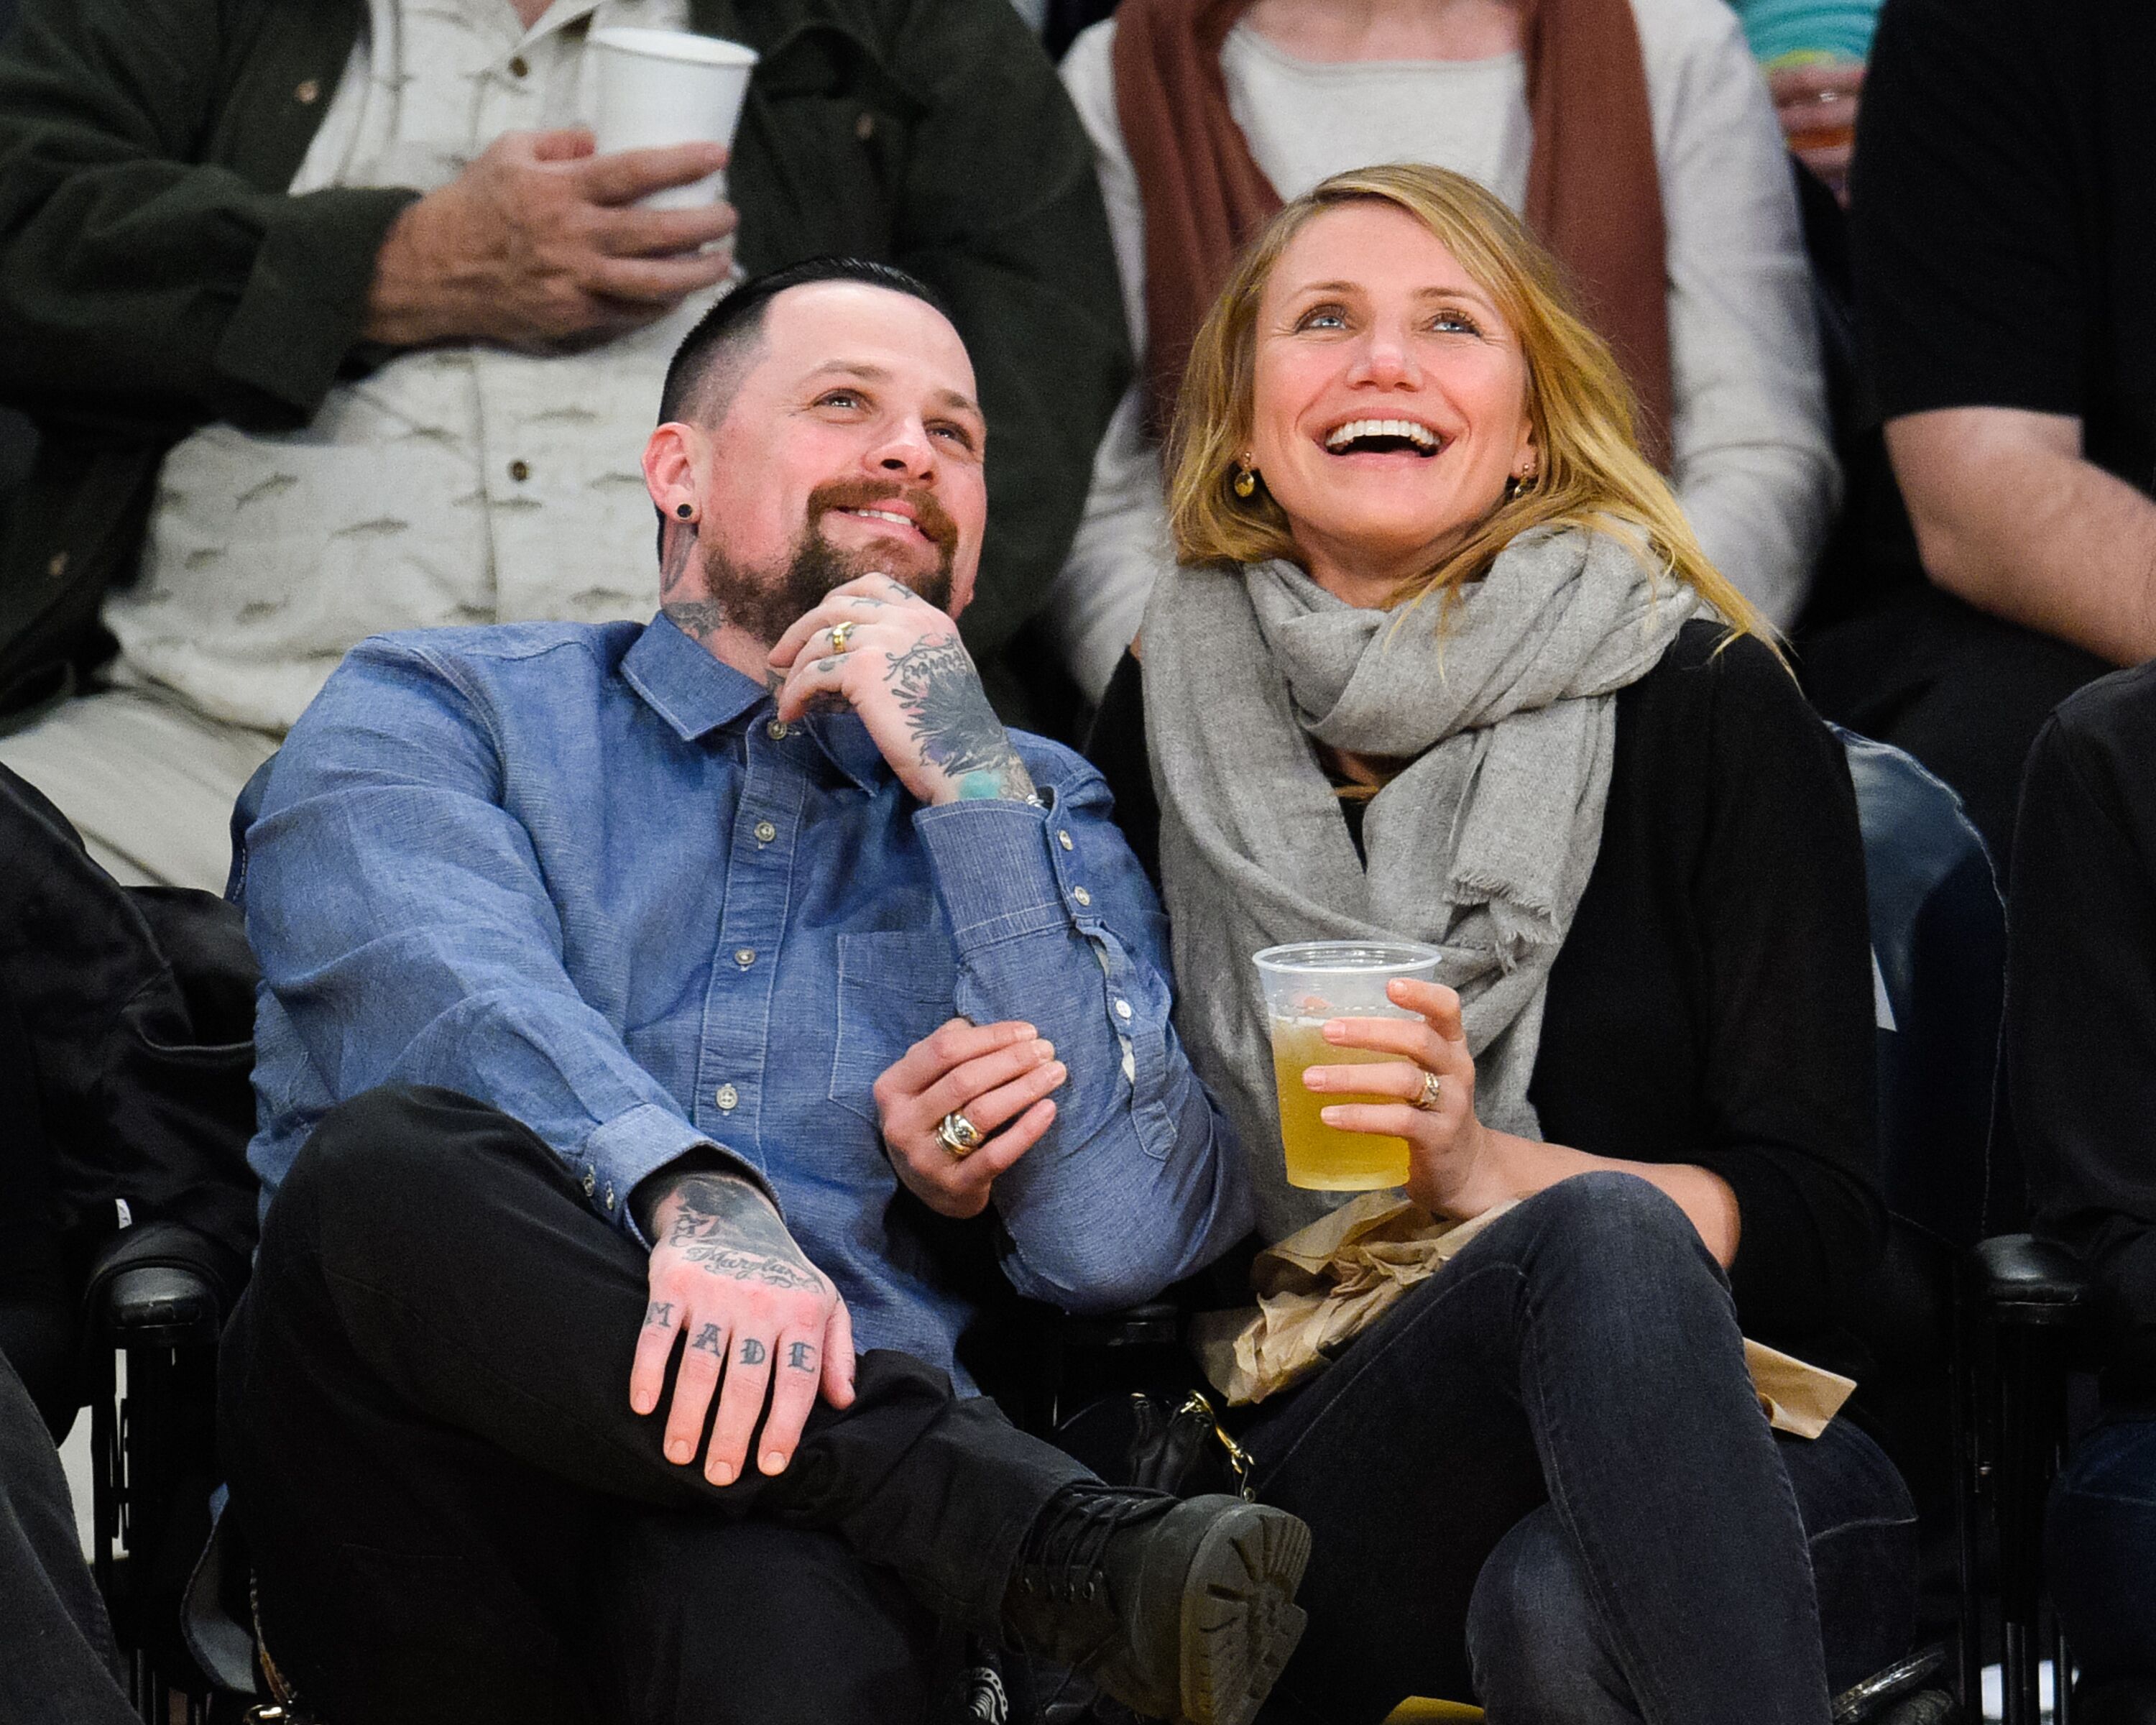  Benji Madden and Cameron Diaz at a basketball game between the Washington Wizards and the Los Angeles Lakers in 2015 | Source: Getty Images